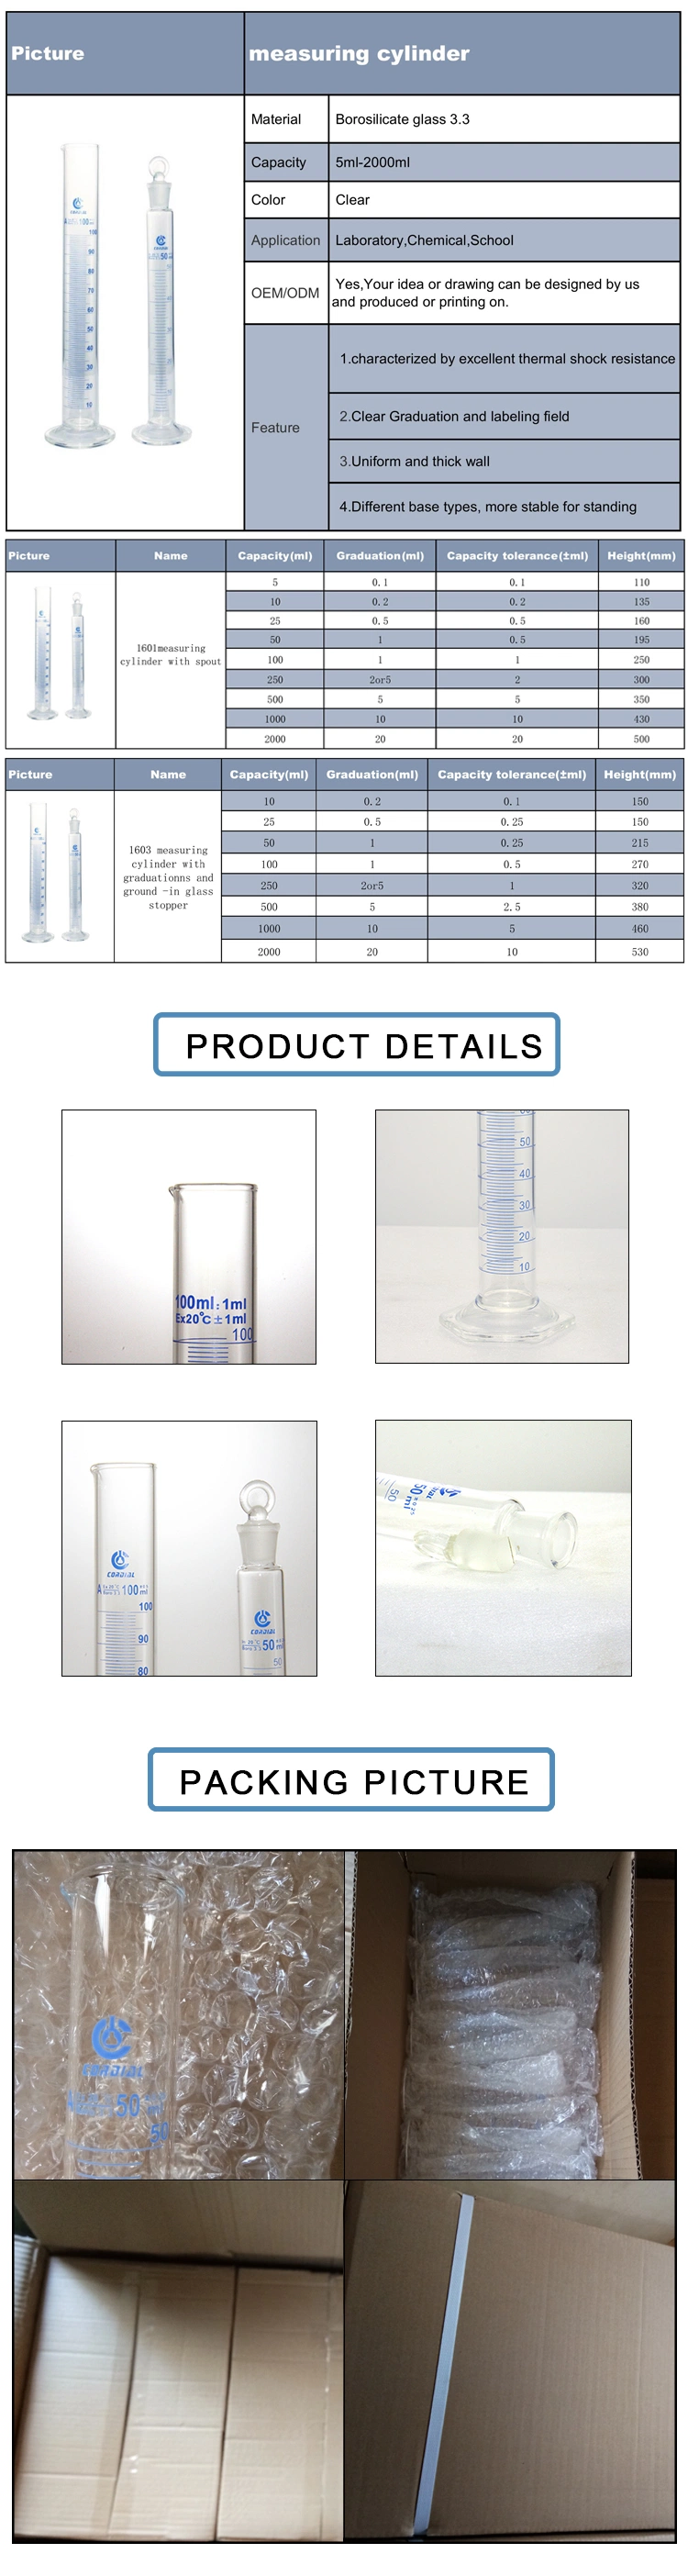 Cordial Manufacturer and Supplier of Laboratory Glassware and Other Lab Items